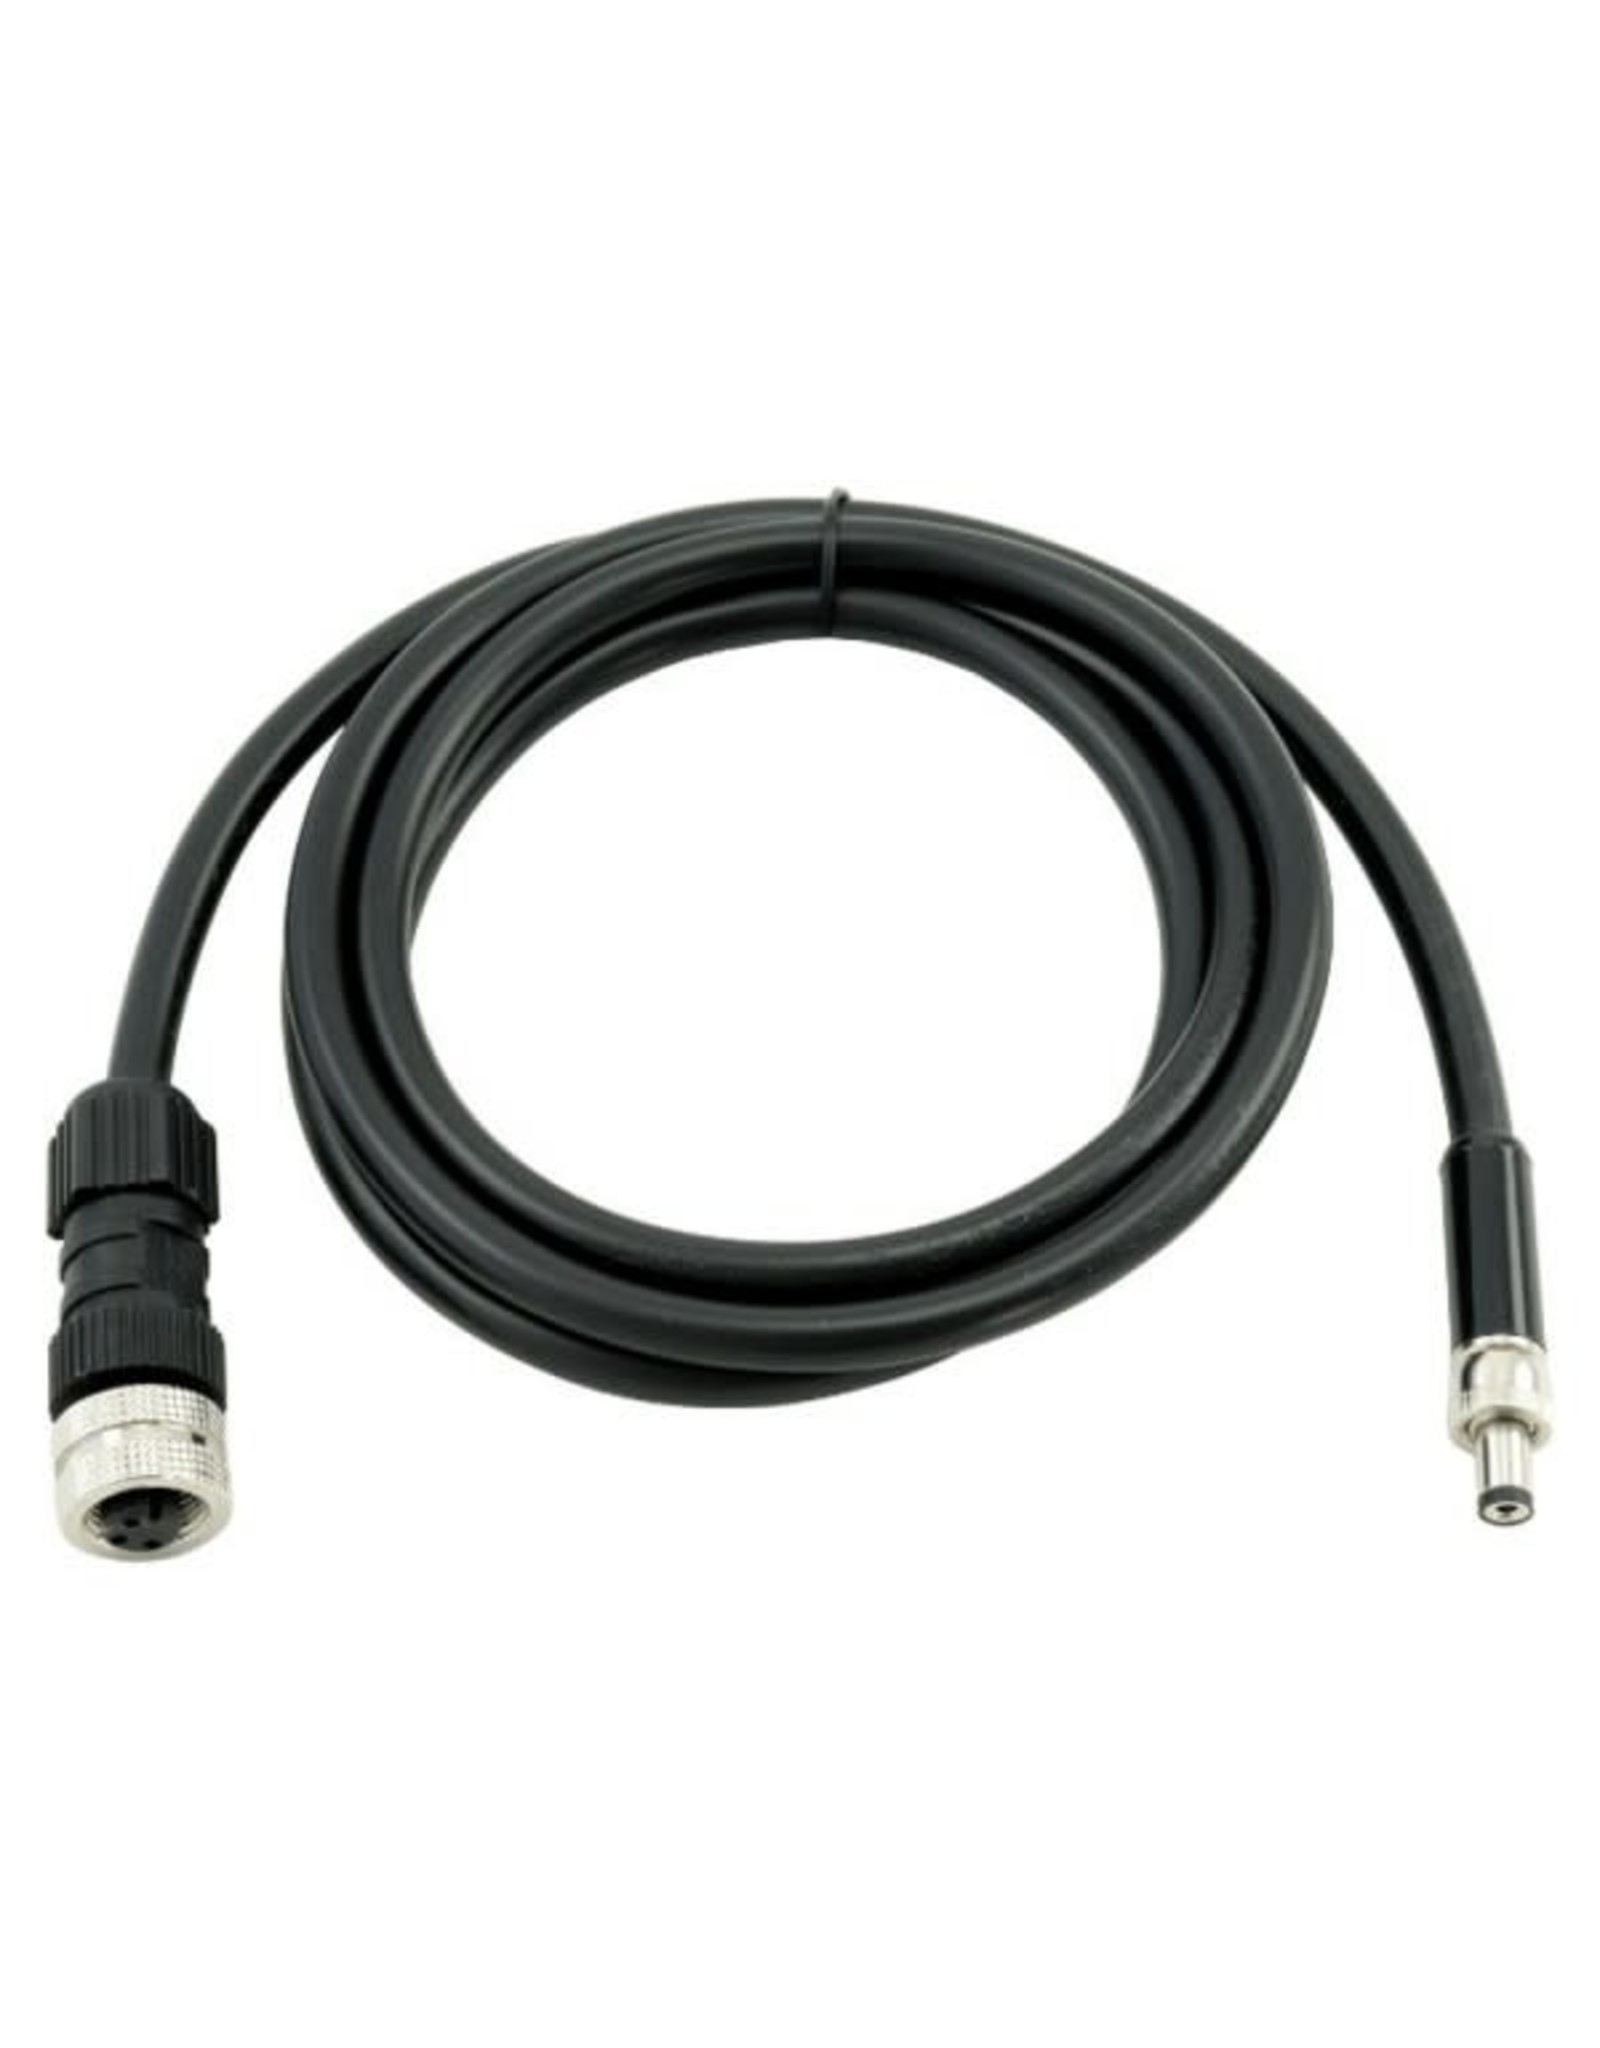 PrimaLuceLab PrimaLuceLab Eagle-compatible power cable for Astro-Physics mounts with CP1/CP2/CP3 controller 8A